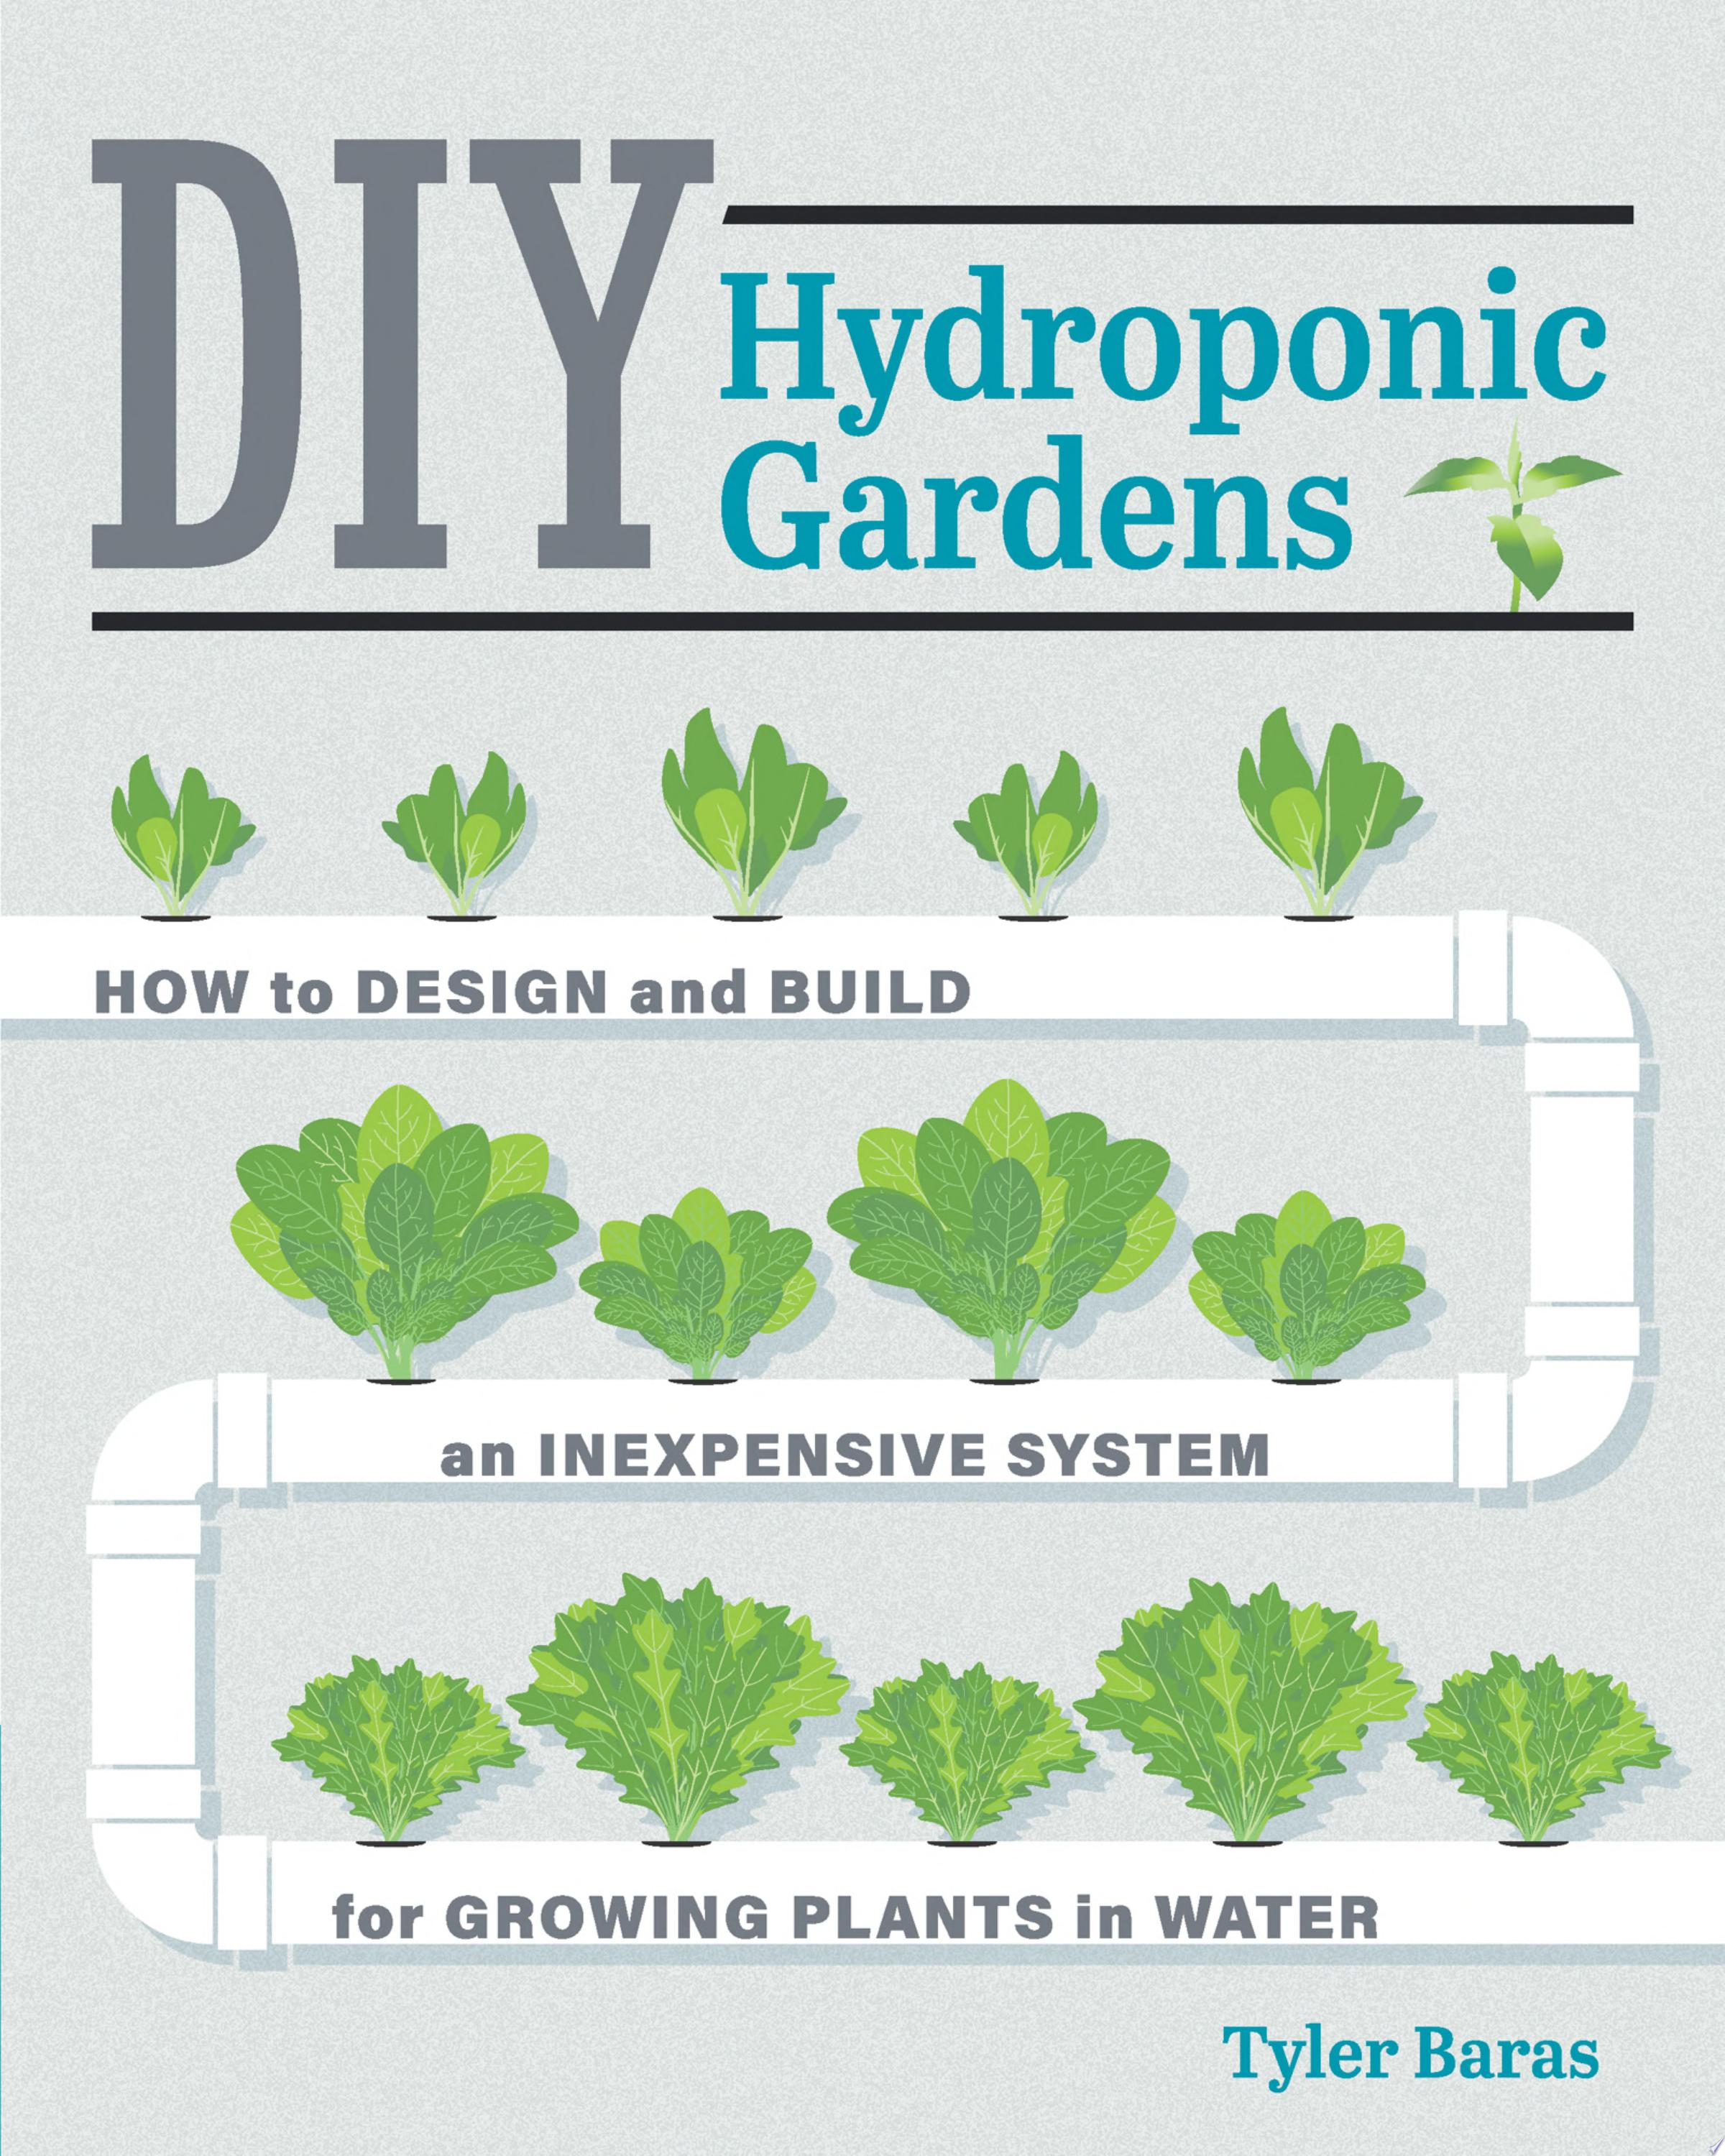 Image for "DIY Hydroponic Gardens"